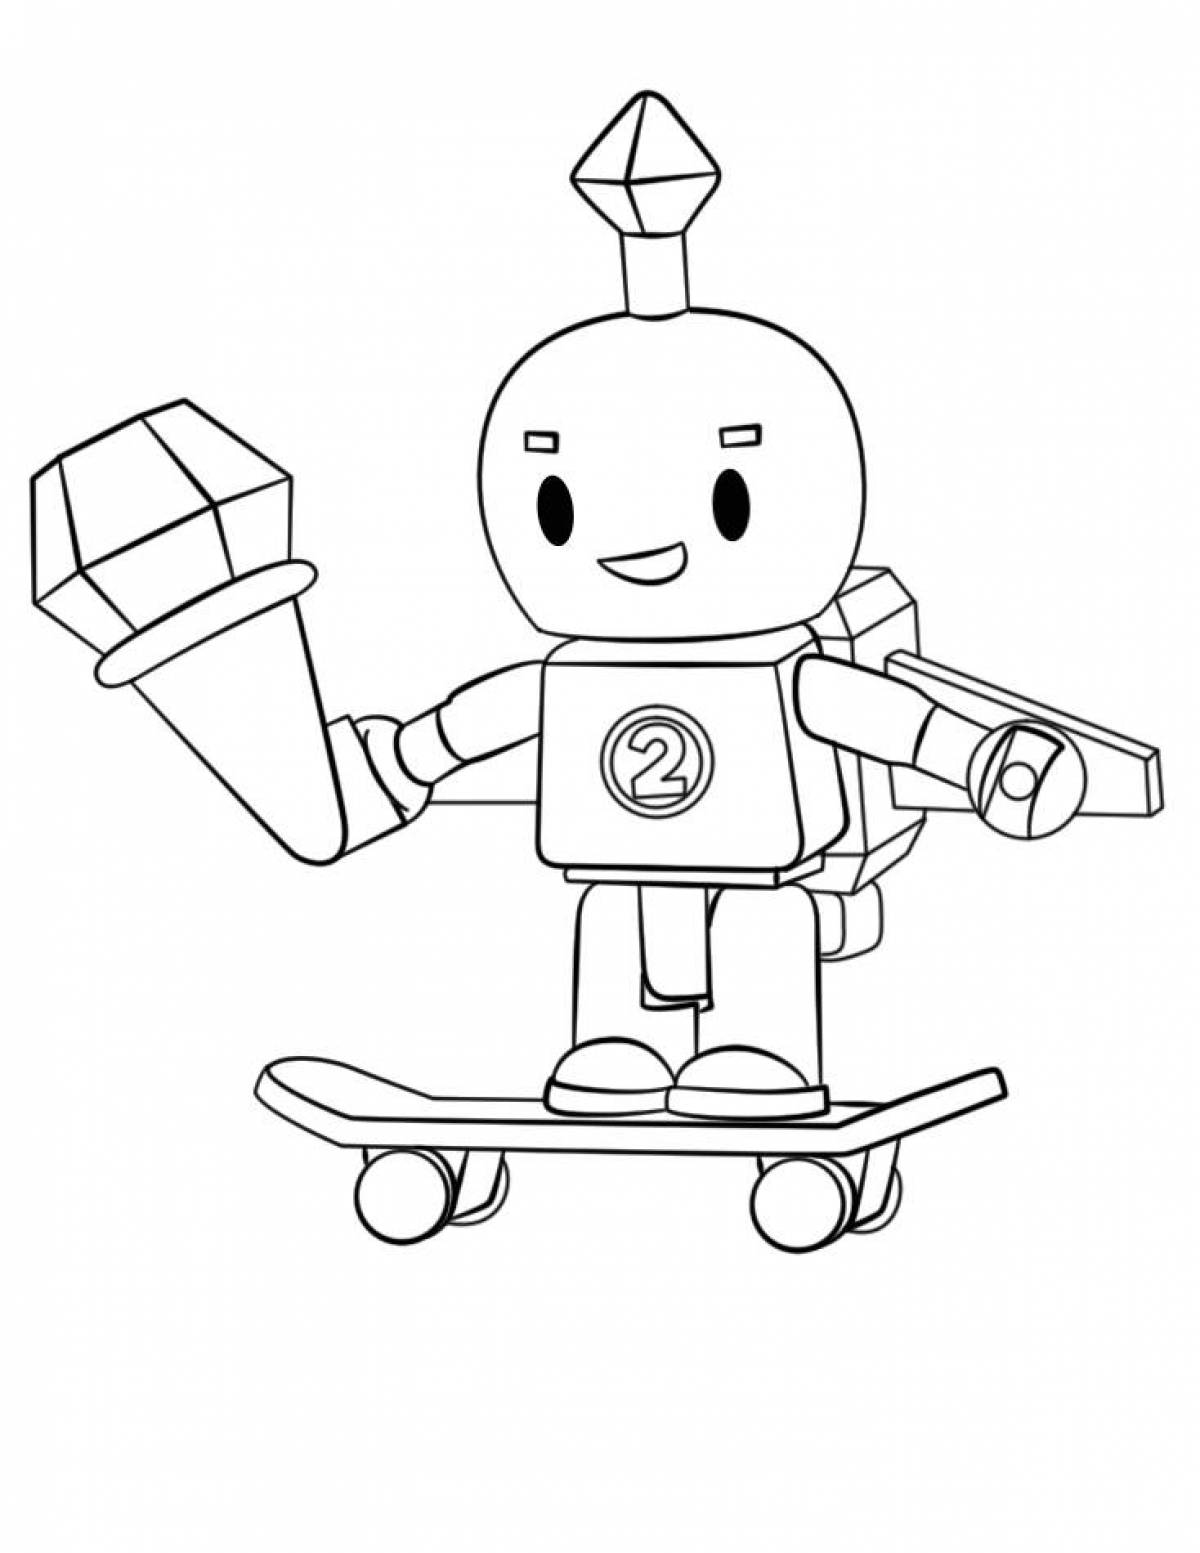 Colorful roblox coloring page for beginners